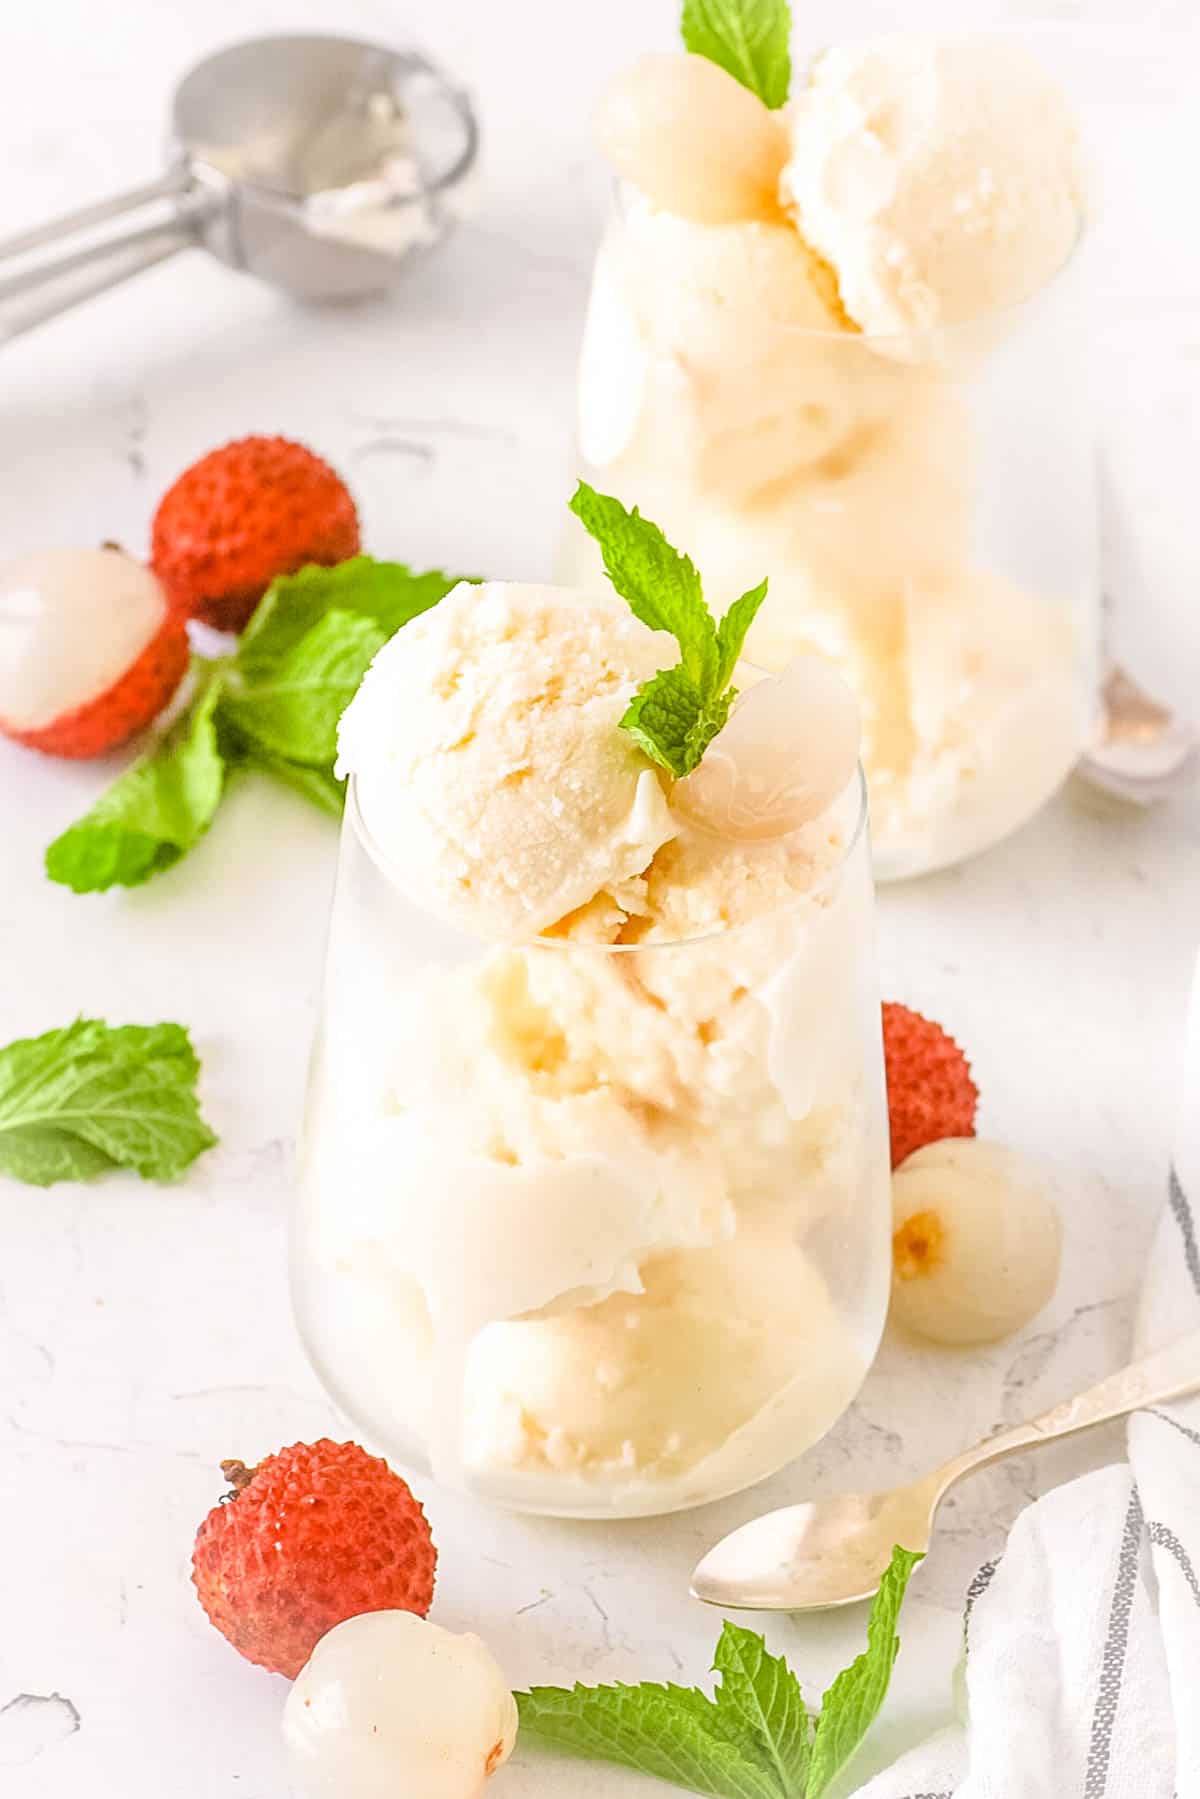 Creamy lychee ice cream served in a glass with mint garnish.